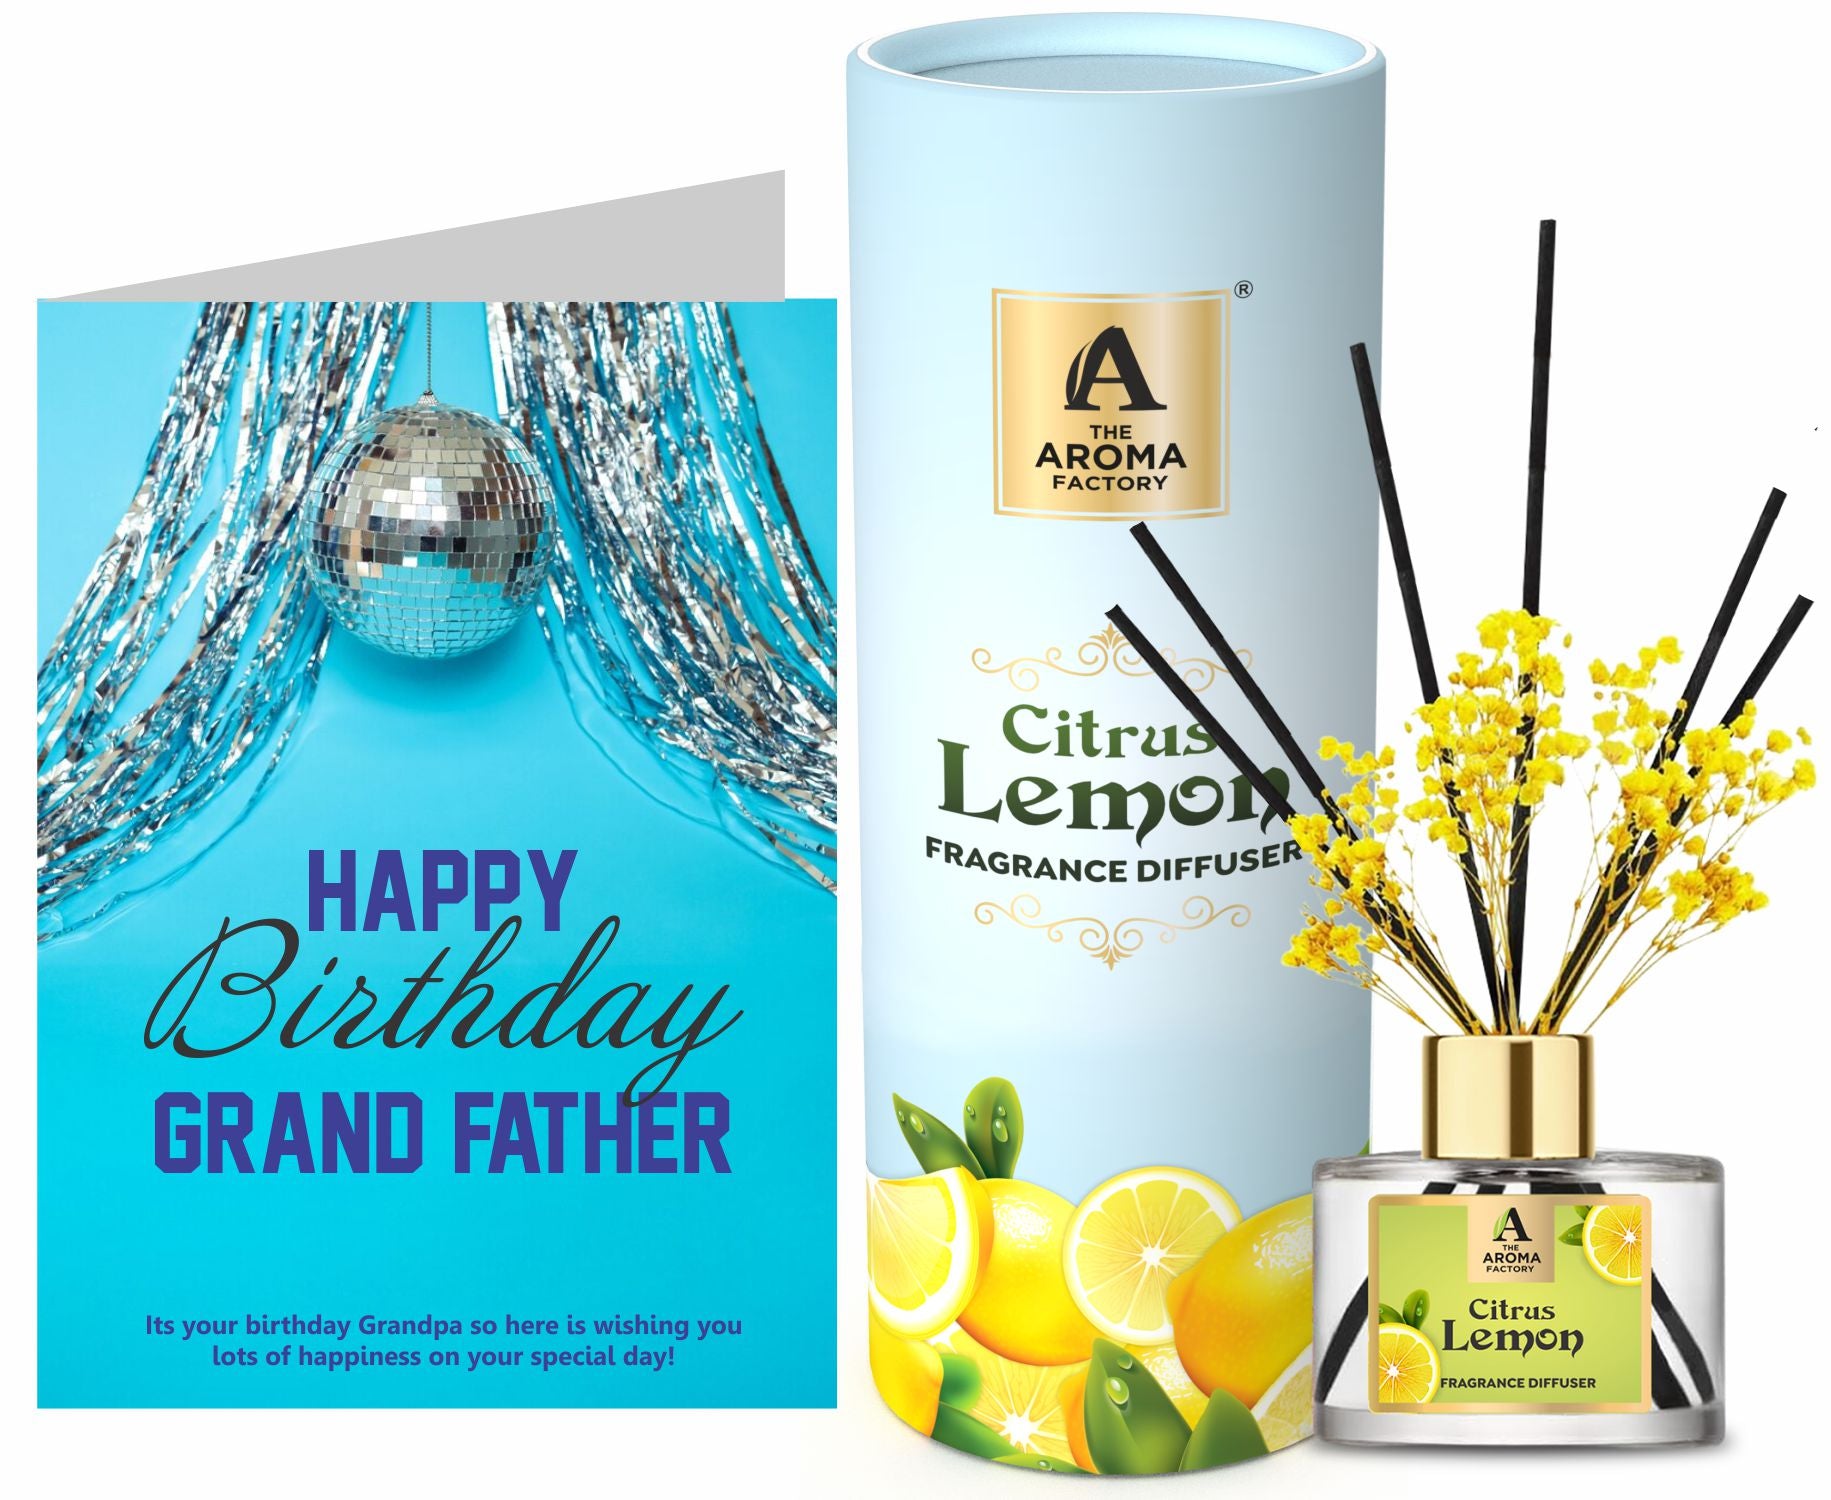 The Aroma Factory Happy Birthday Dada Grand Dad Gift with Card, Citrus Lemon Fragrance Reed Diffuser Set (1 Box + 1 Card)